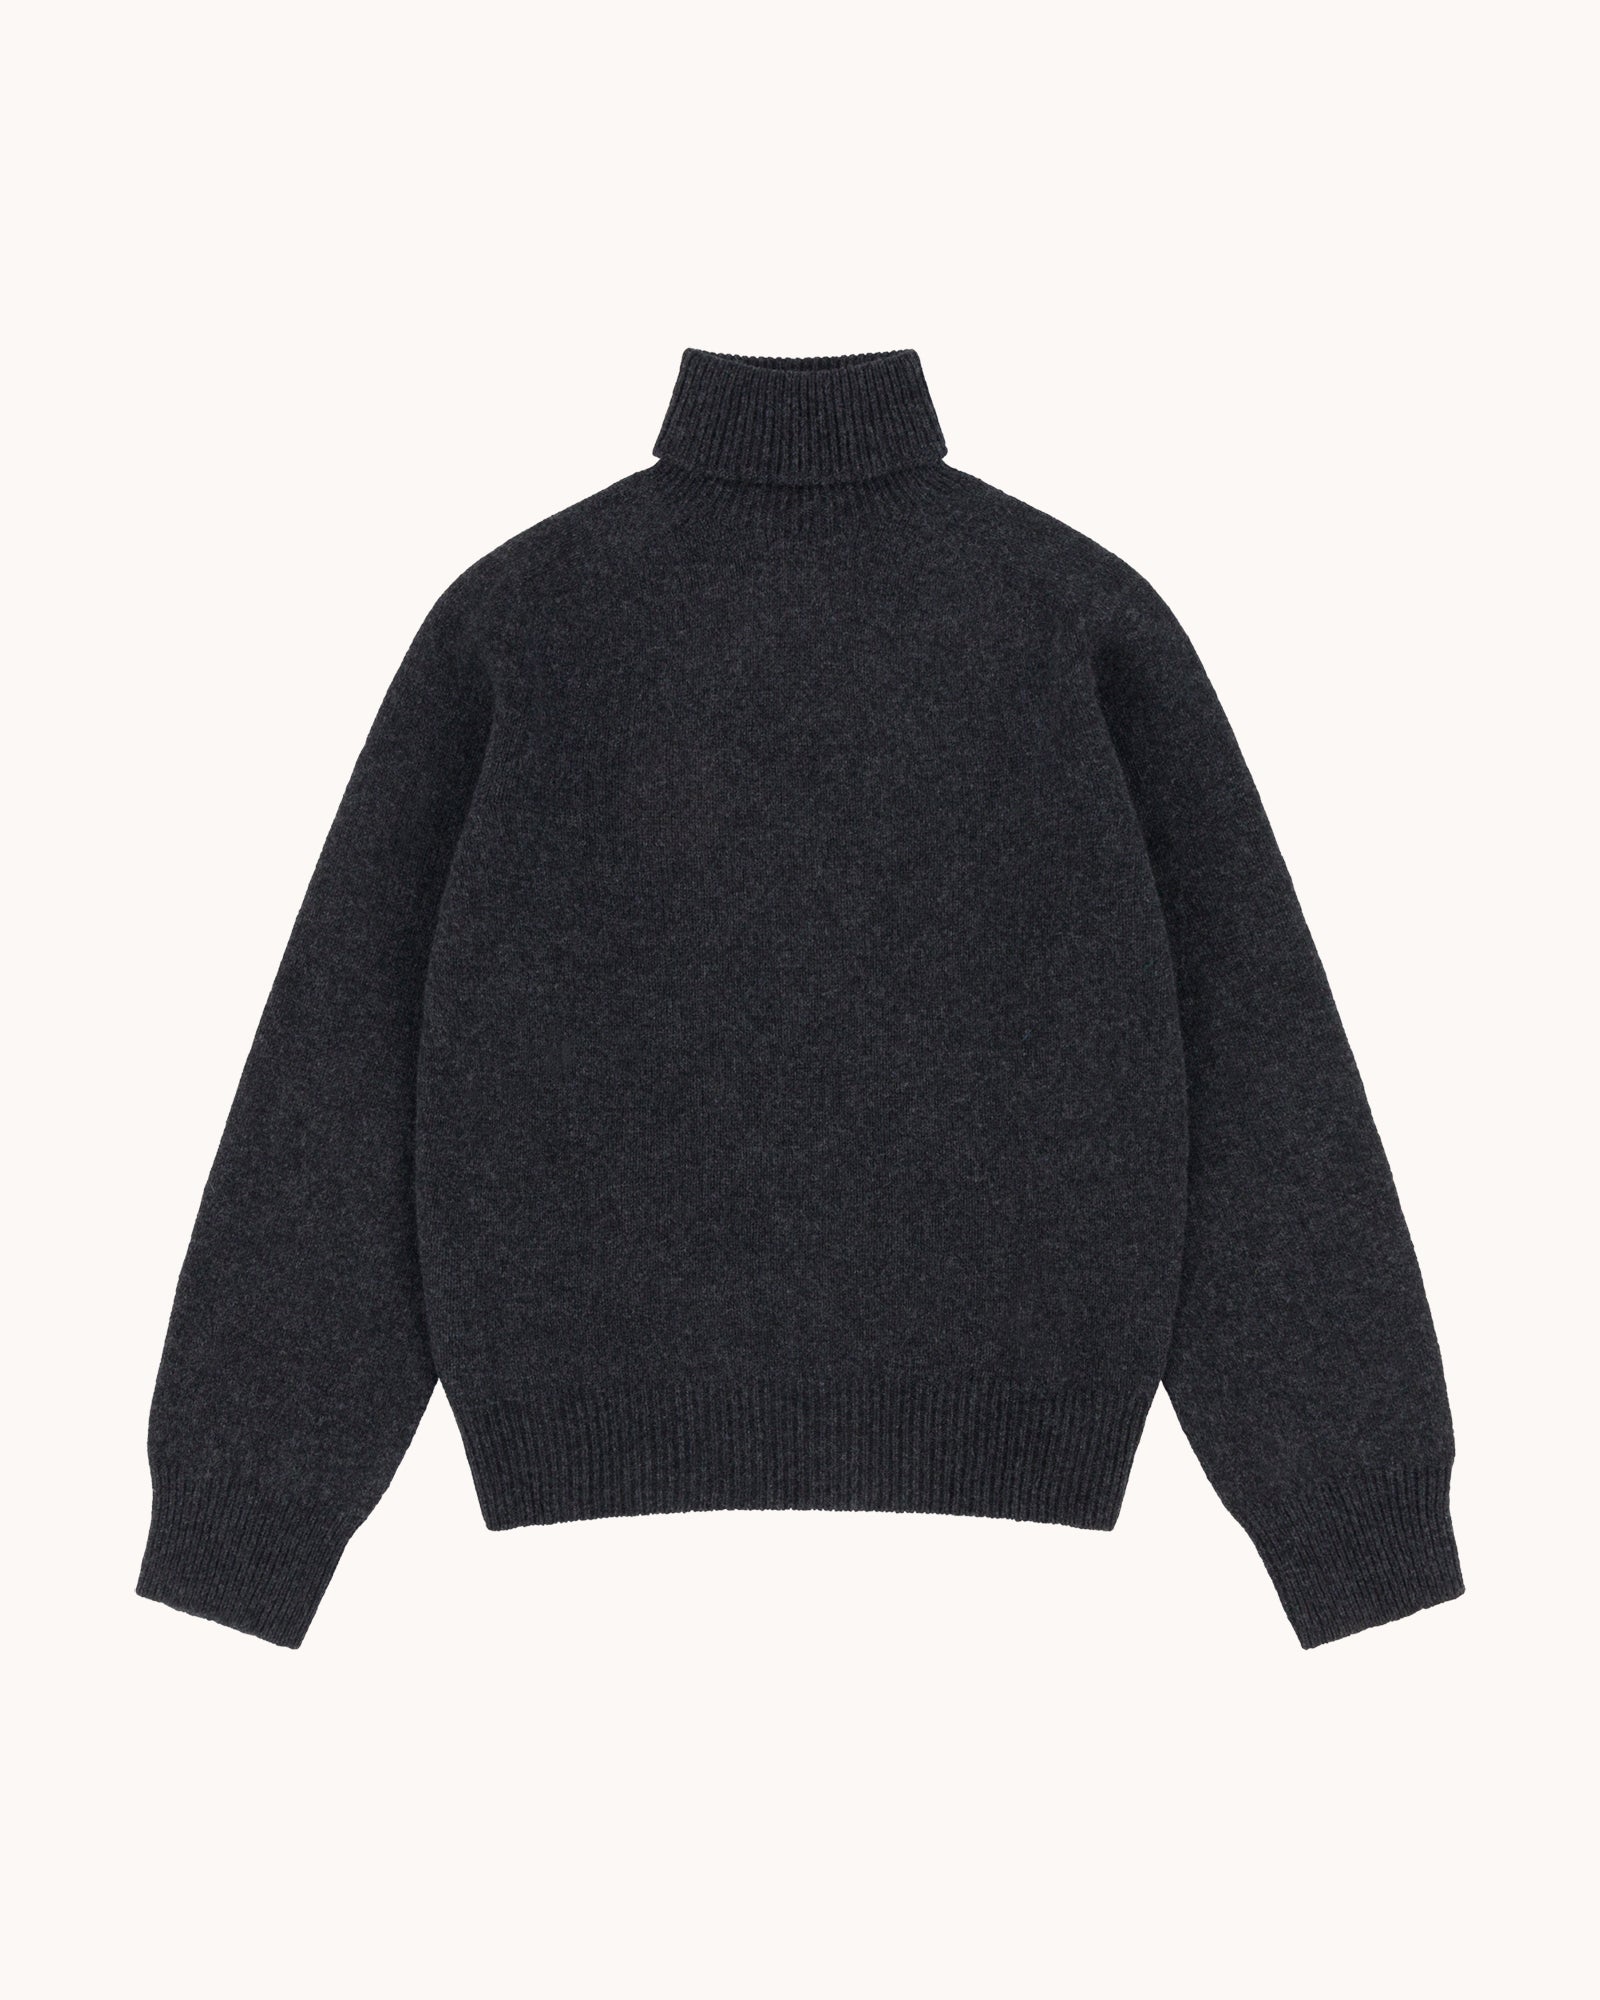 Lambswool Roll Neck Sweater - Charcoal